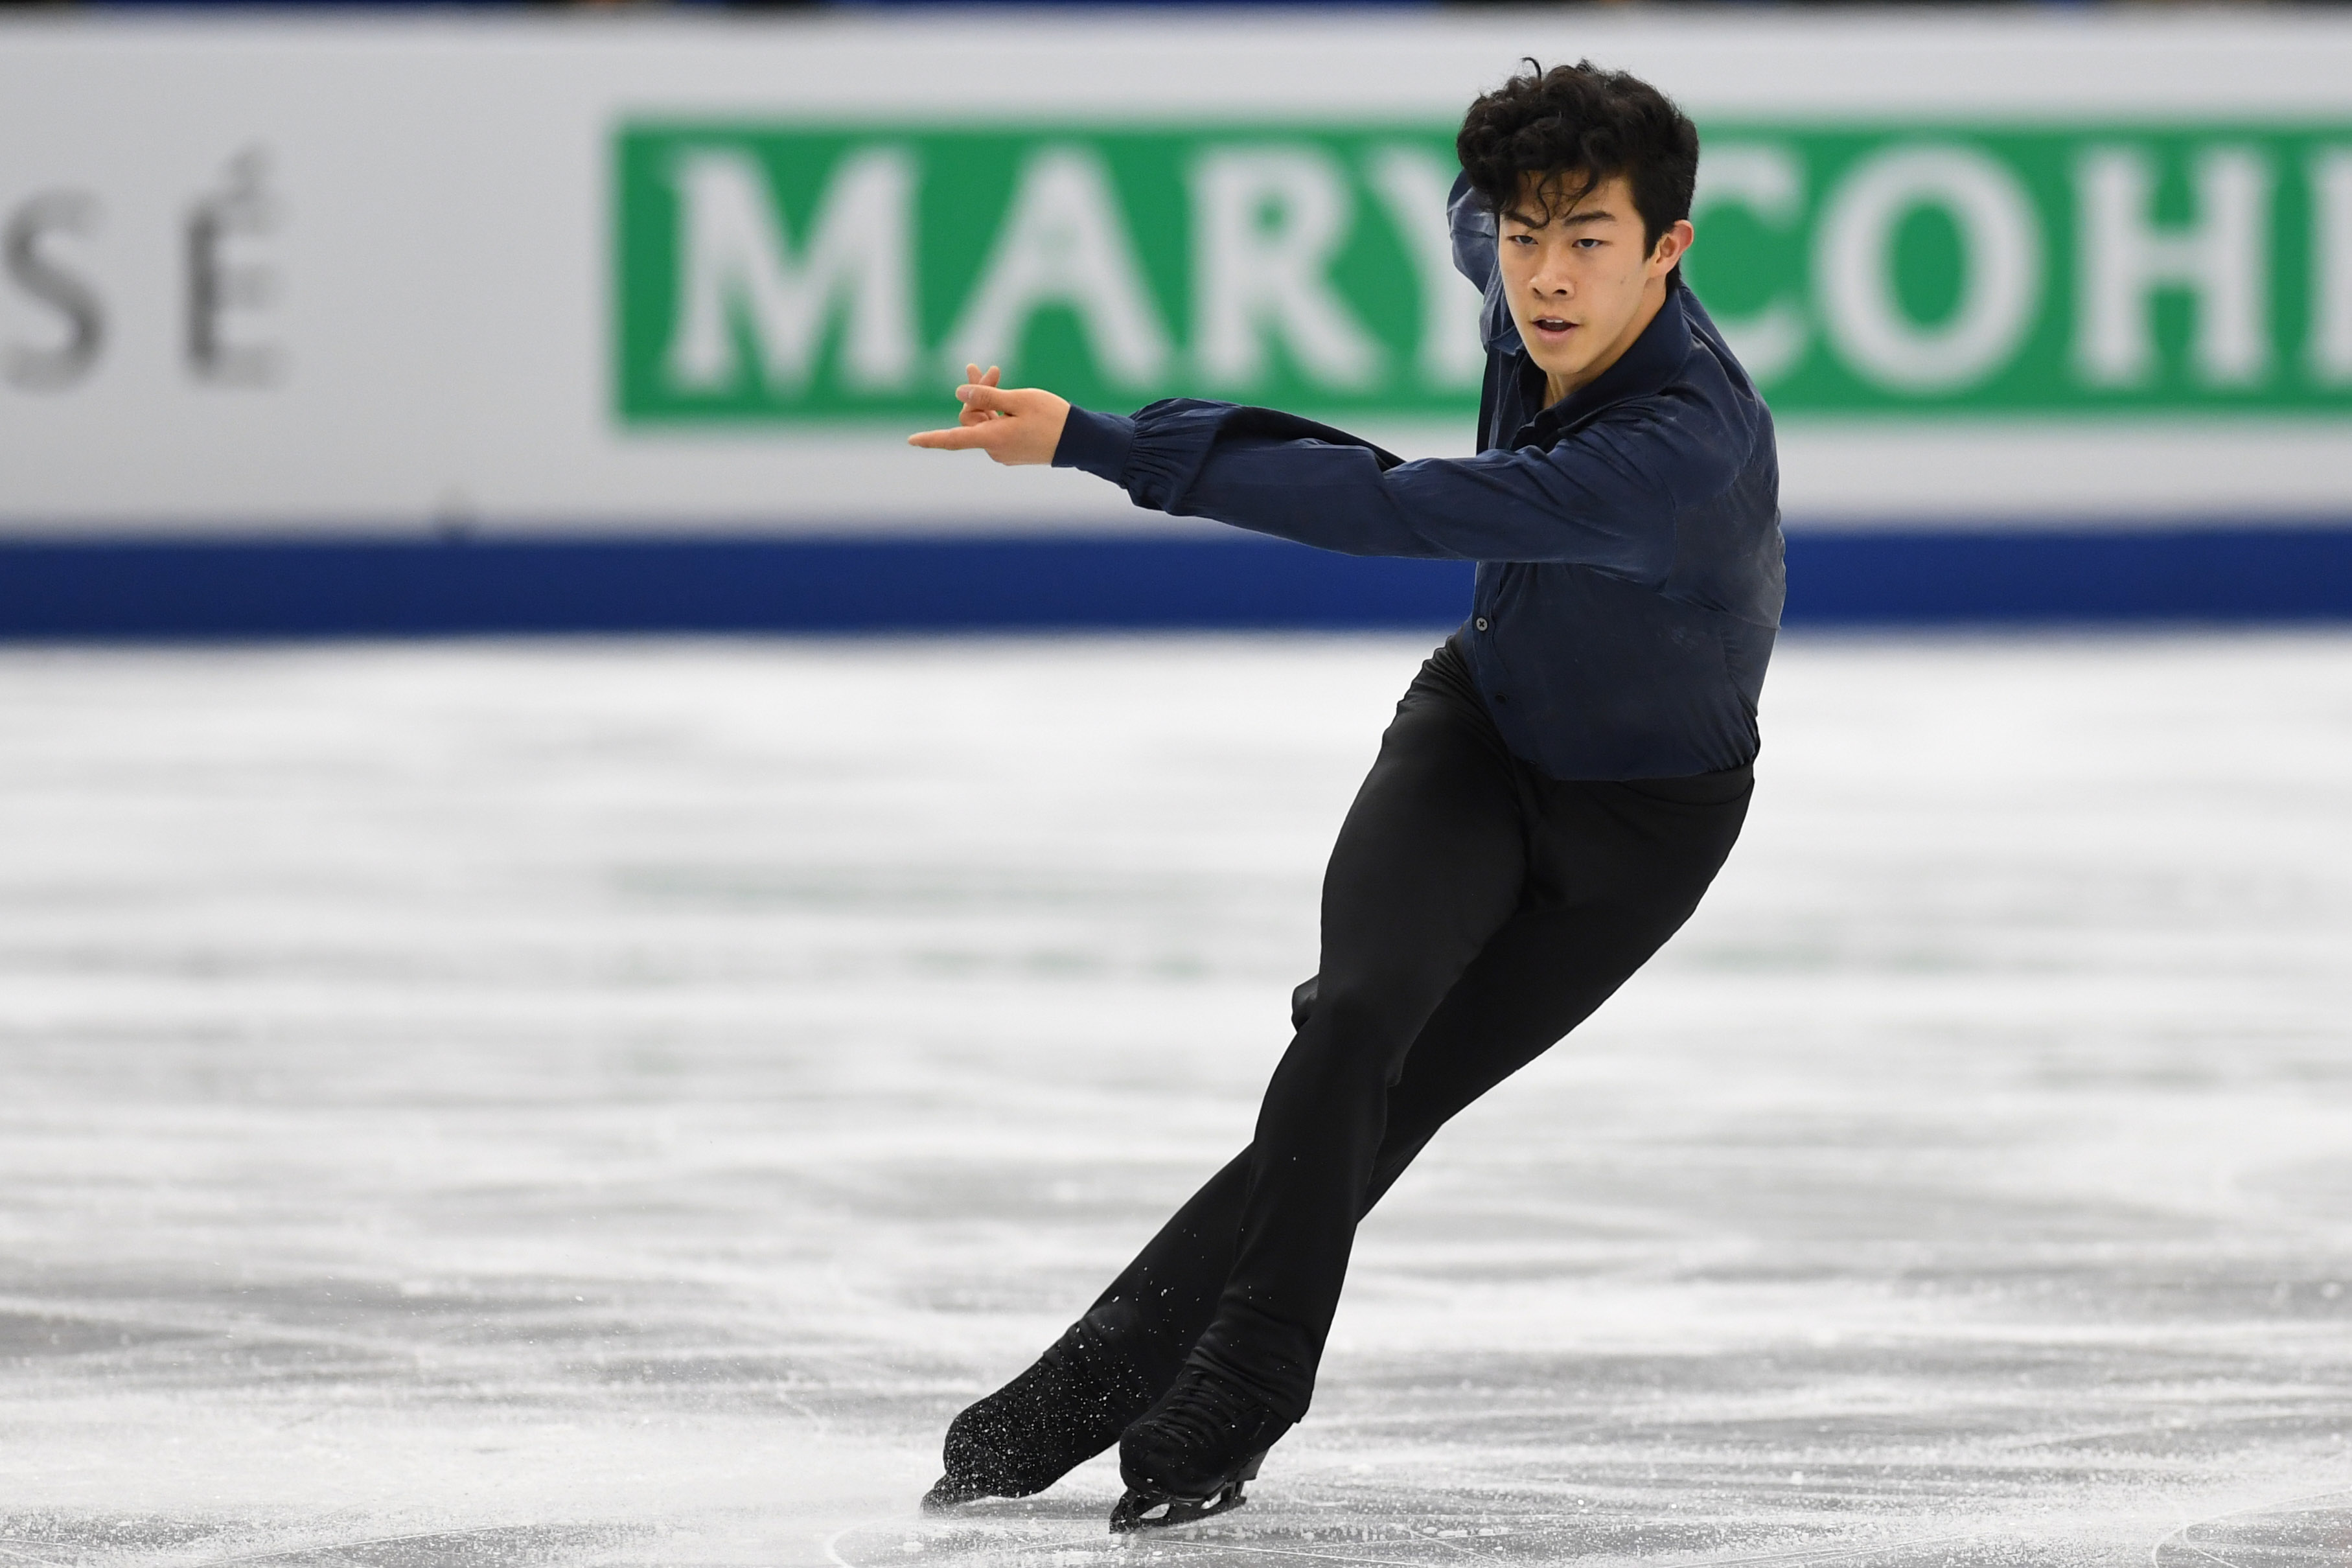 Nathan Chen of the USA competes in the Men free skating during the ISU Junior &amp; Senior Grand Prix of Figure Skating Final at Nippon Gaishi Hall on December 8, 2017 in Nagoya, Japan. Atsushi Tomura - ISU—ISU via Getty Images. (Atsushi Tomura - ISU—ISU via Getty Images.)